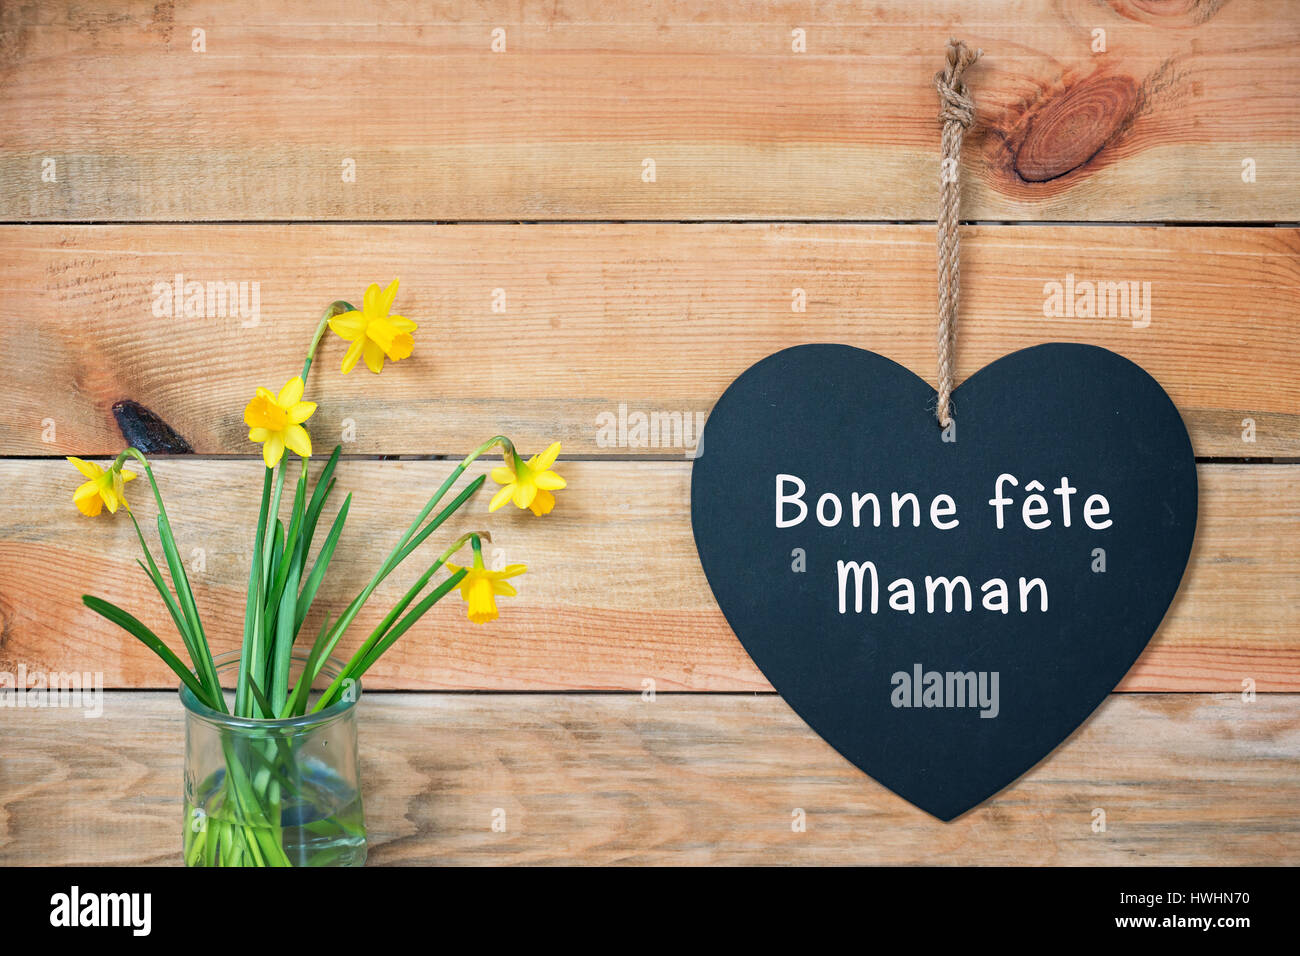 Bonne fete maman, French mothers day card, wood planks with daffodils and a blackboard in the shape of a  heart Stock Photo